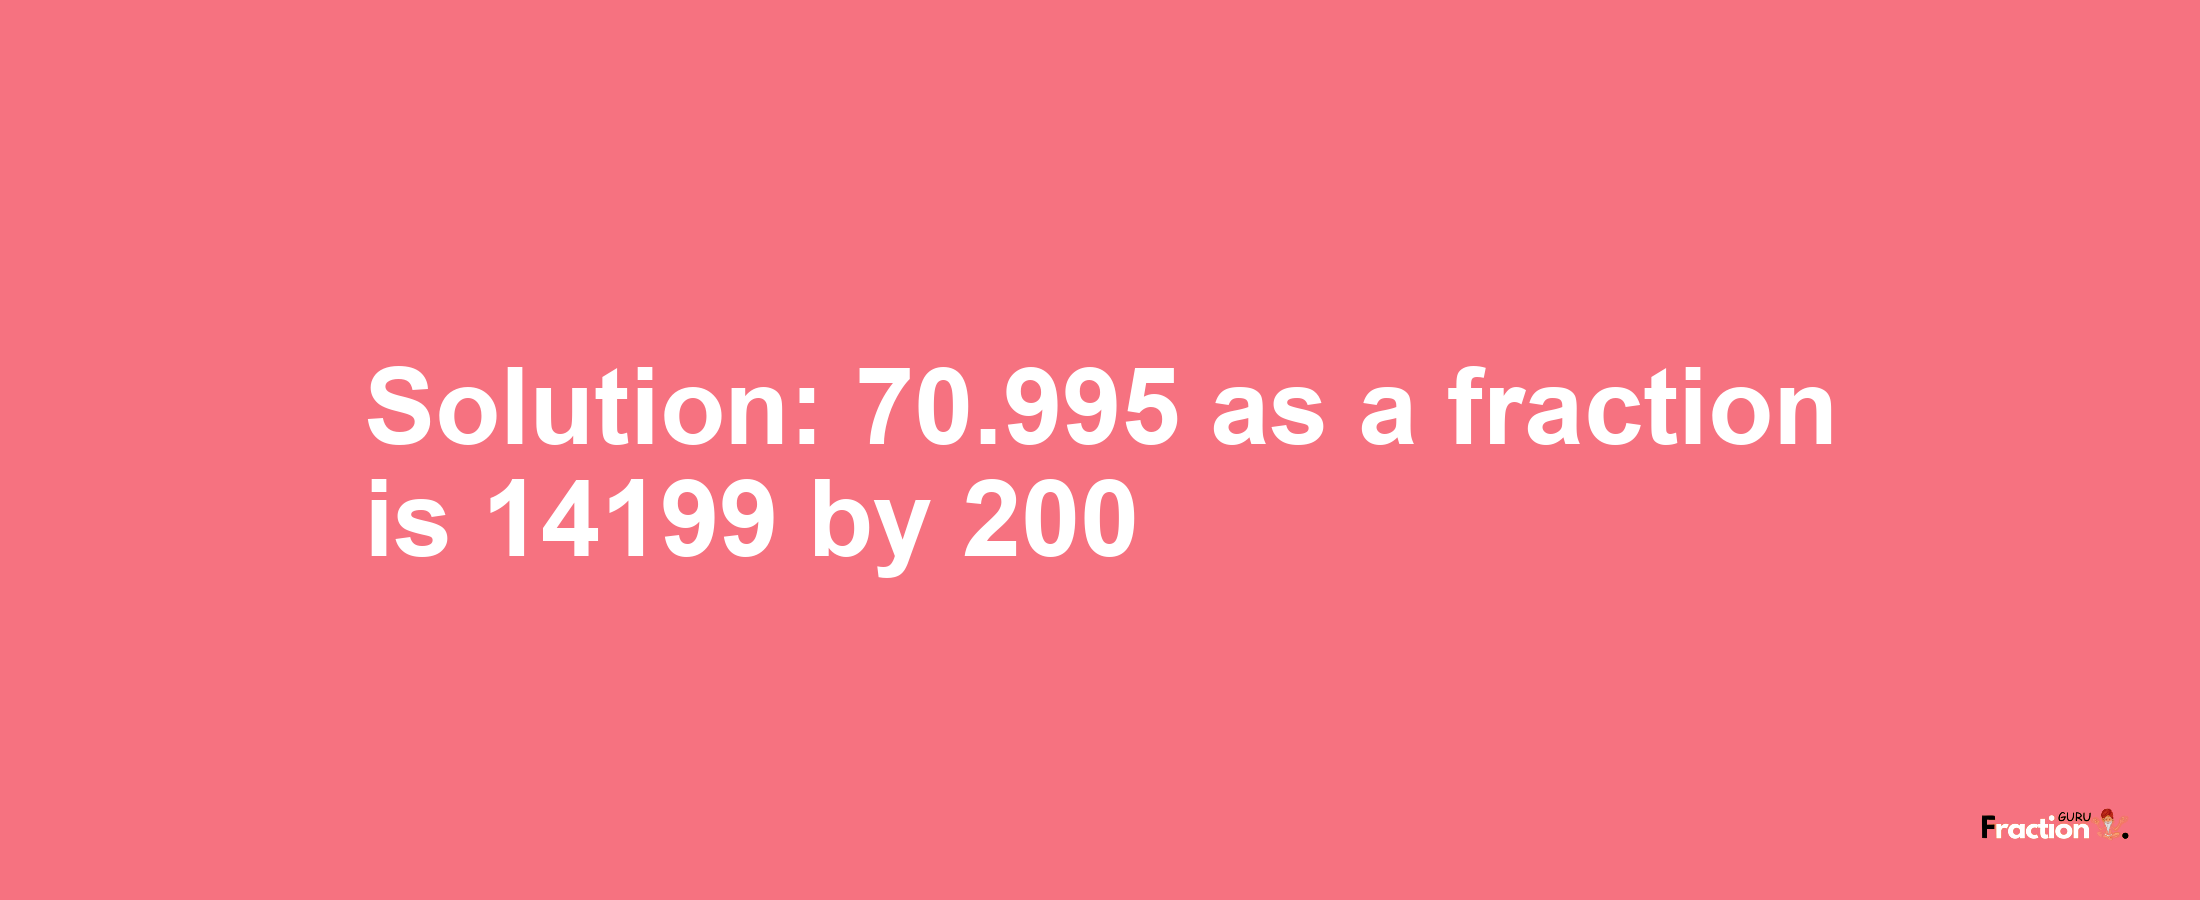 Solution:70.995 as a fraction is 14199/200